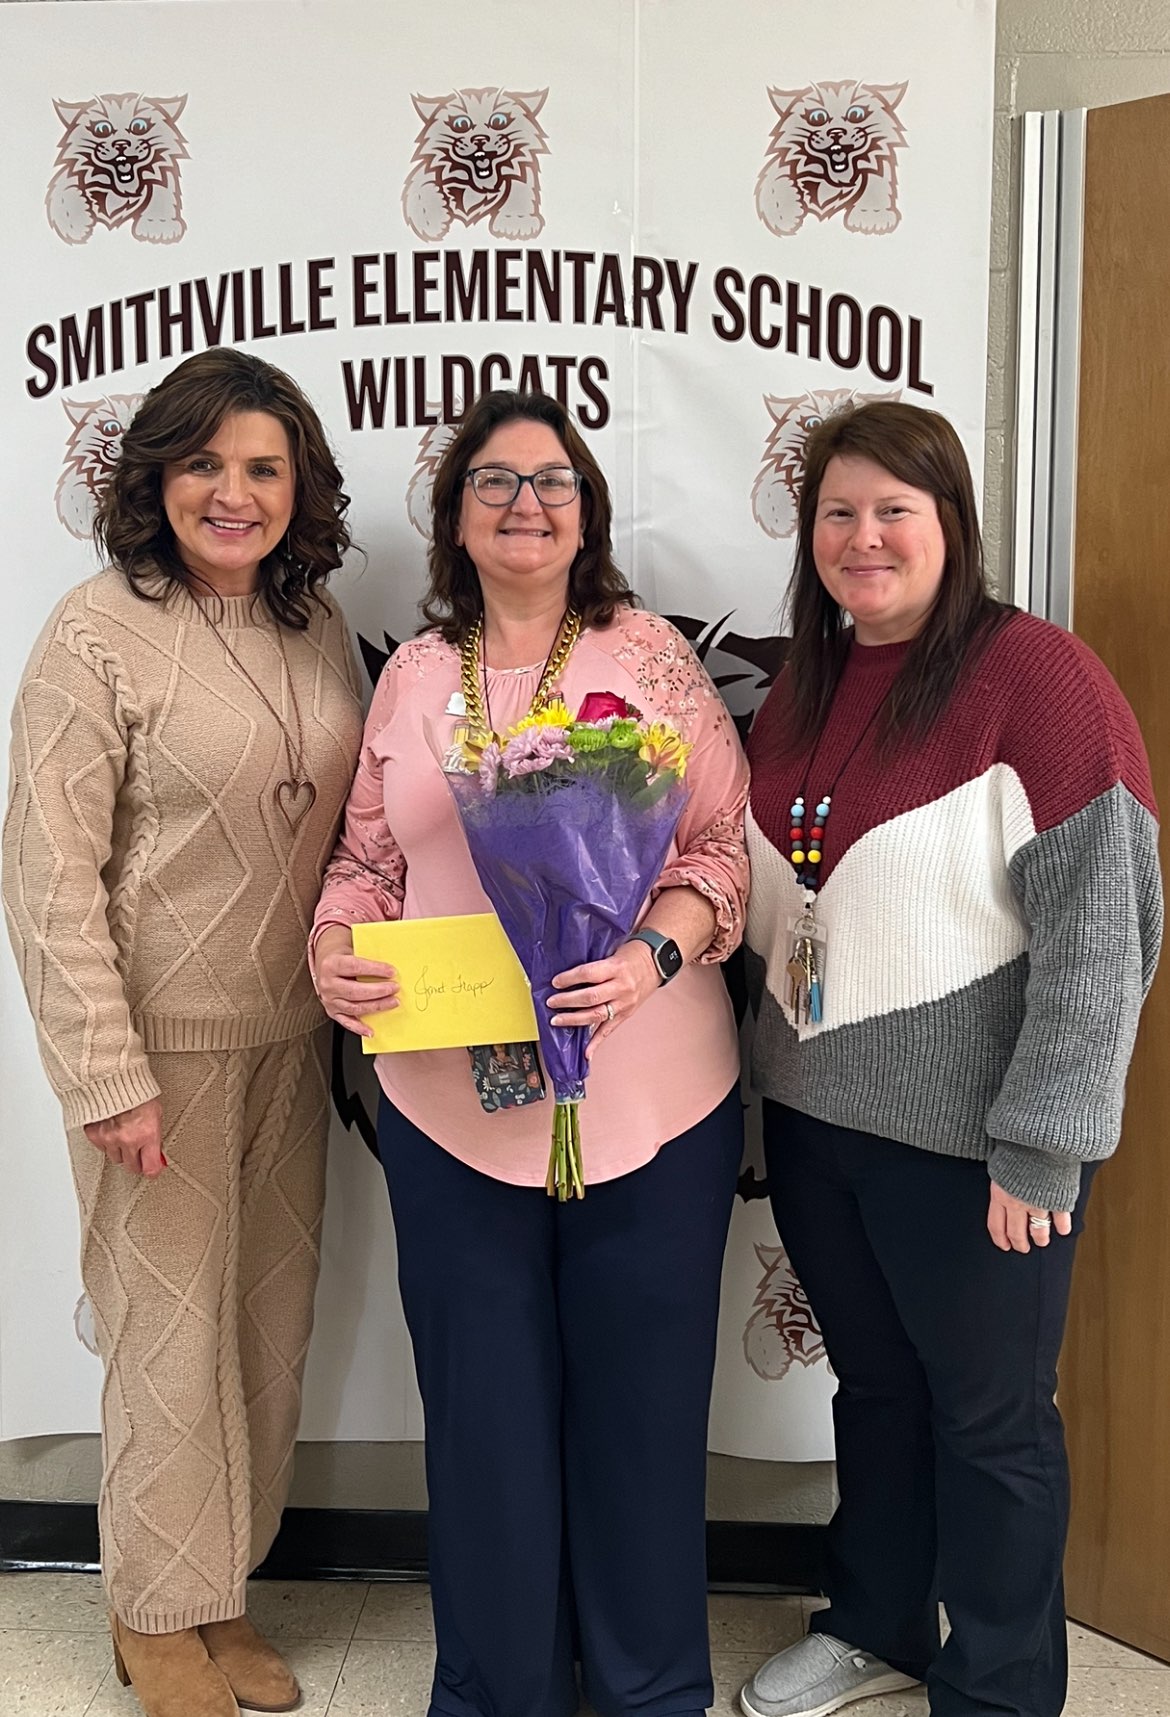 Janet Trapp, February teacher of the month